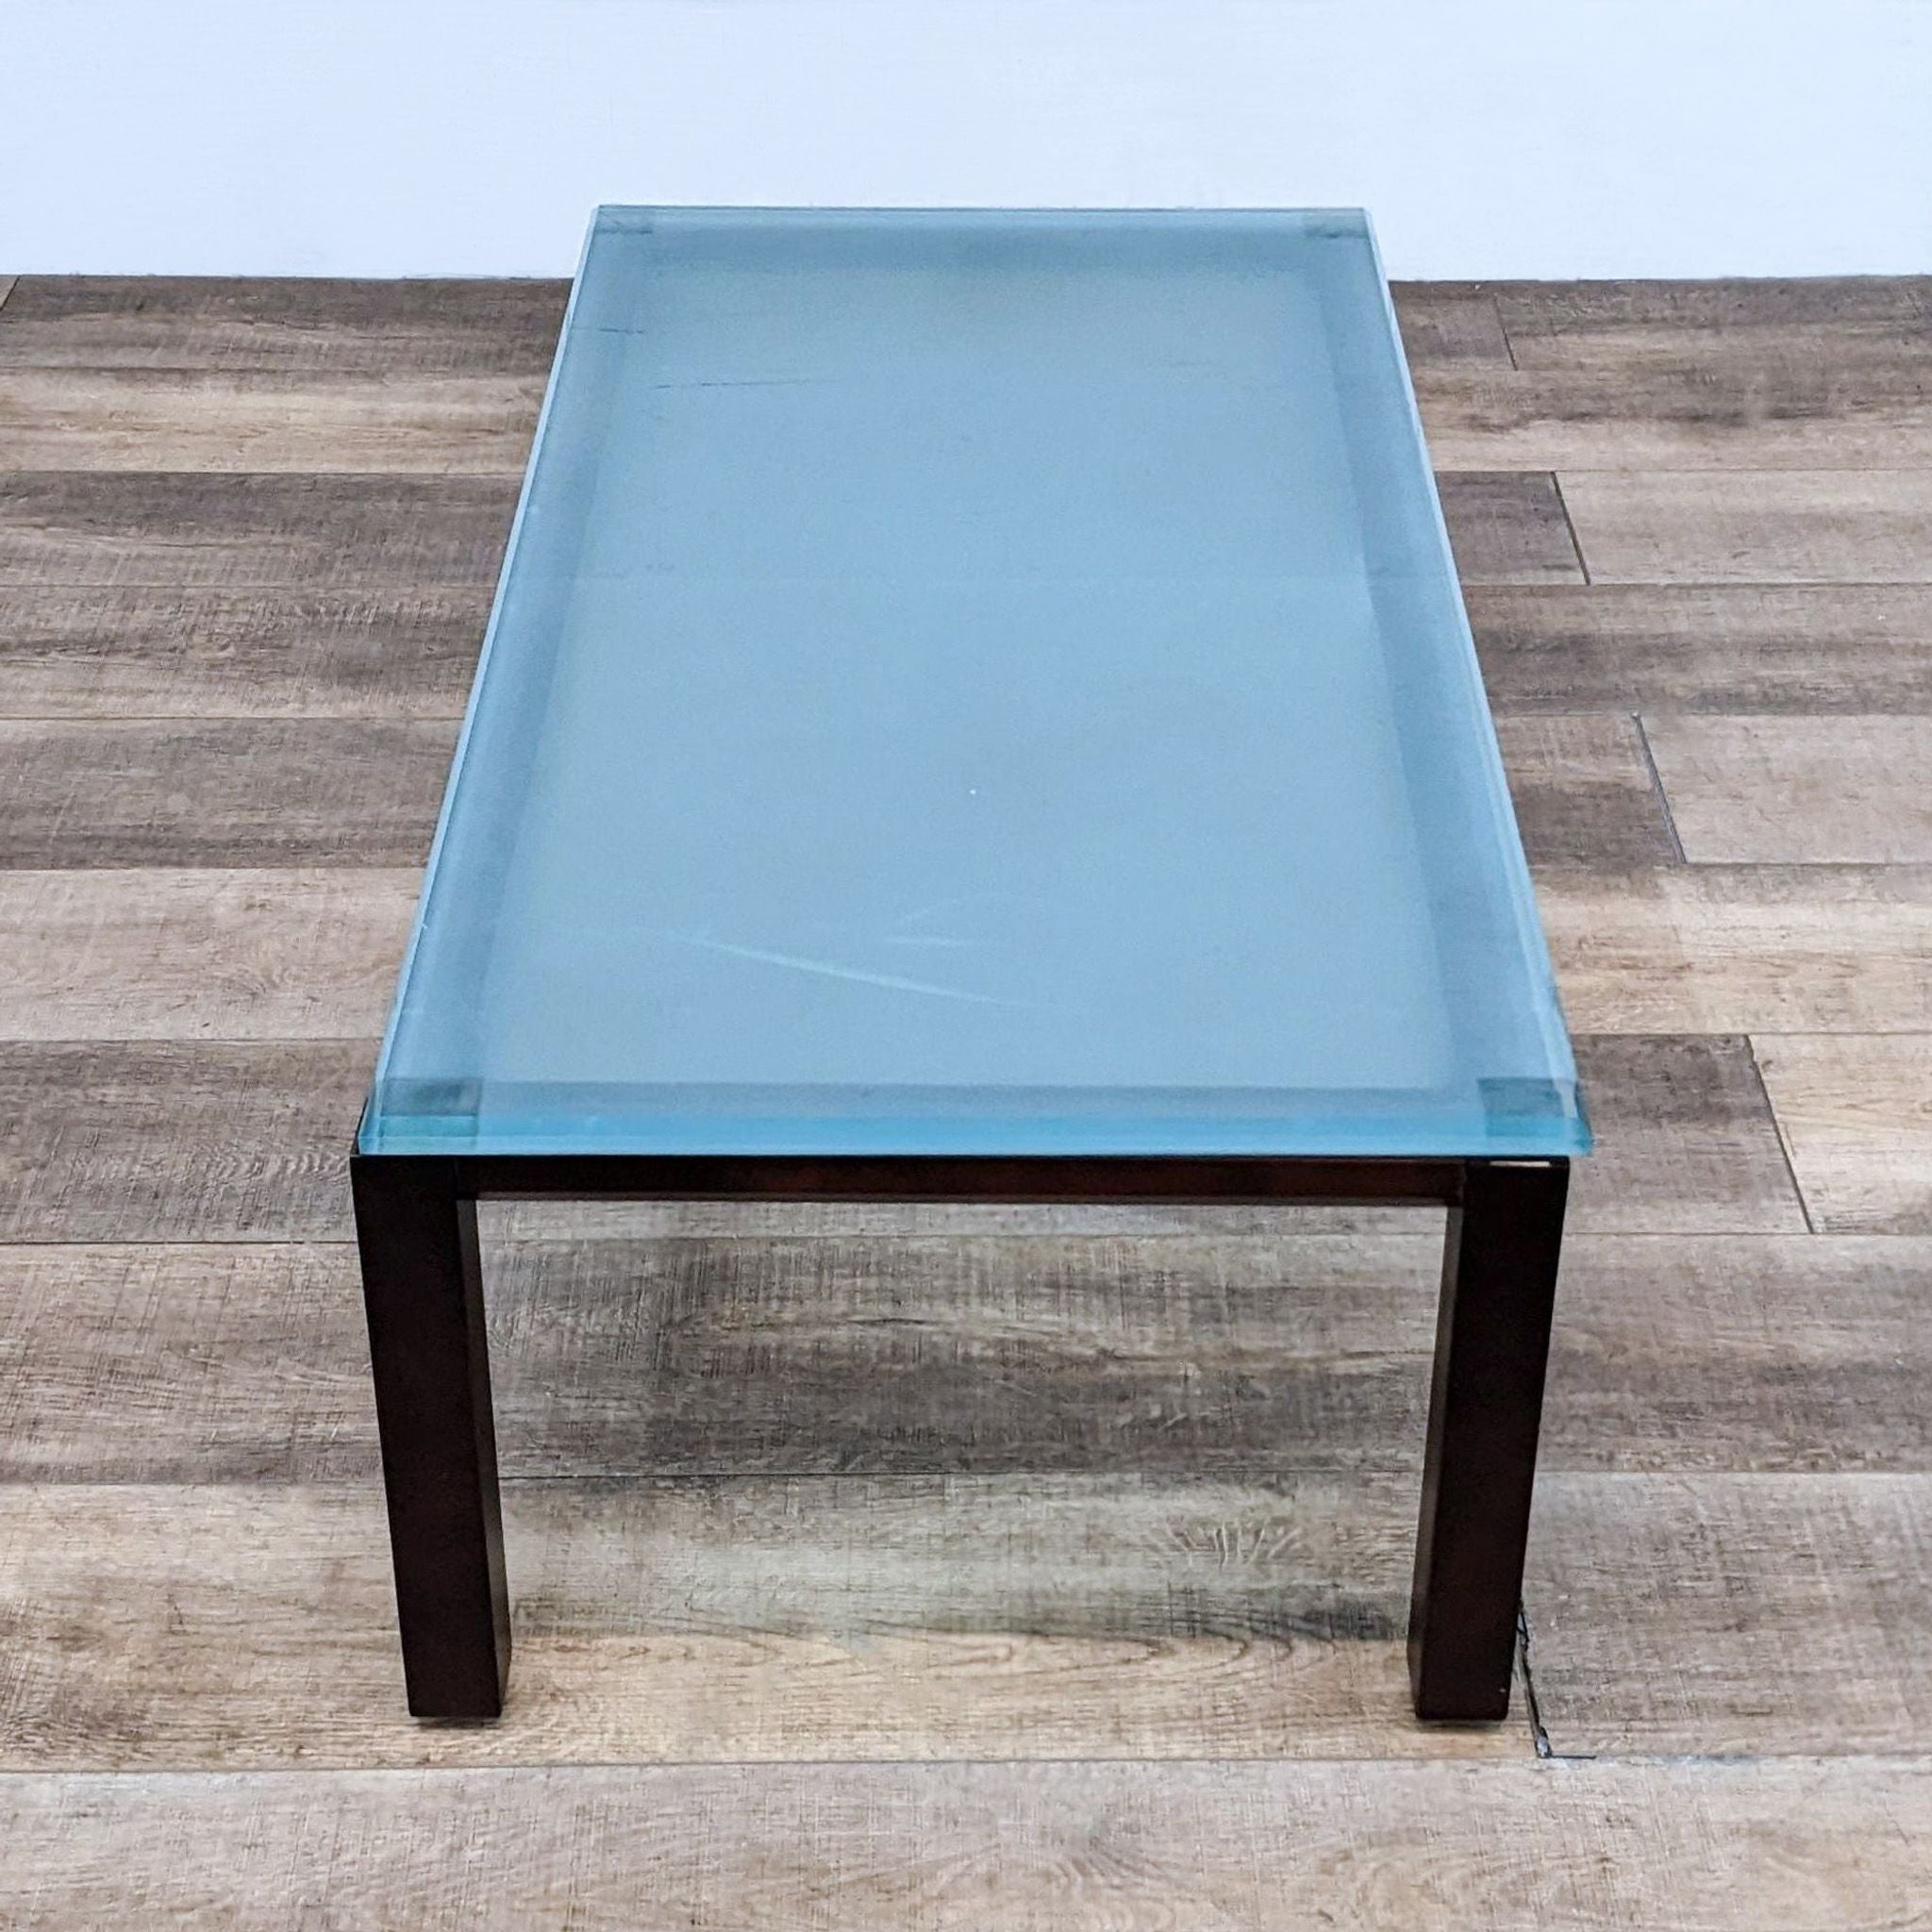 Opaque glass-topped coffee table by Reperch, with a solid wood frame, seen from an overhead angle.